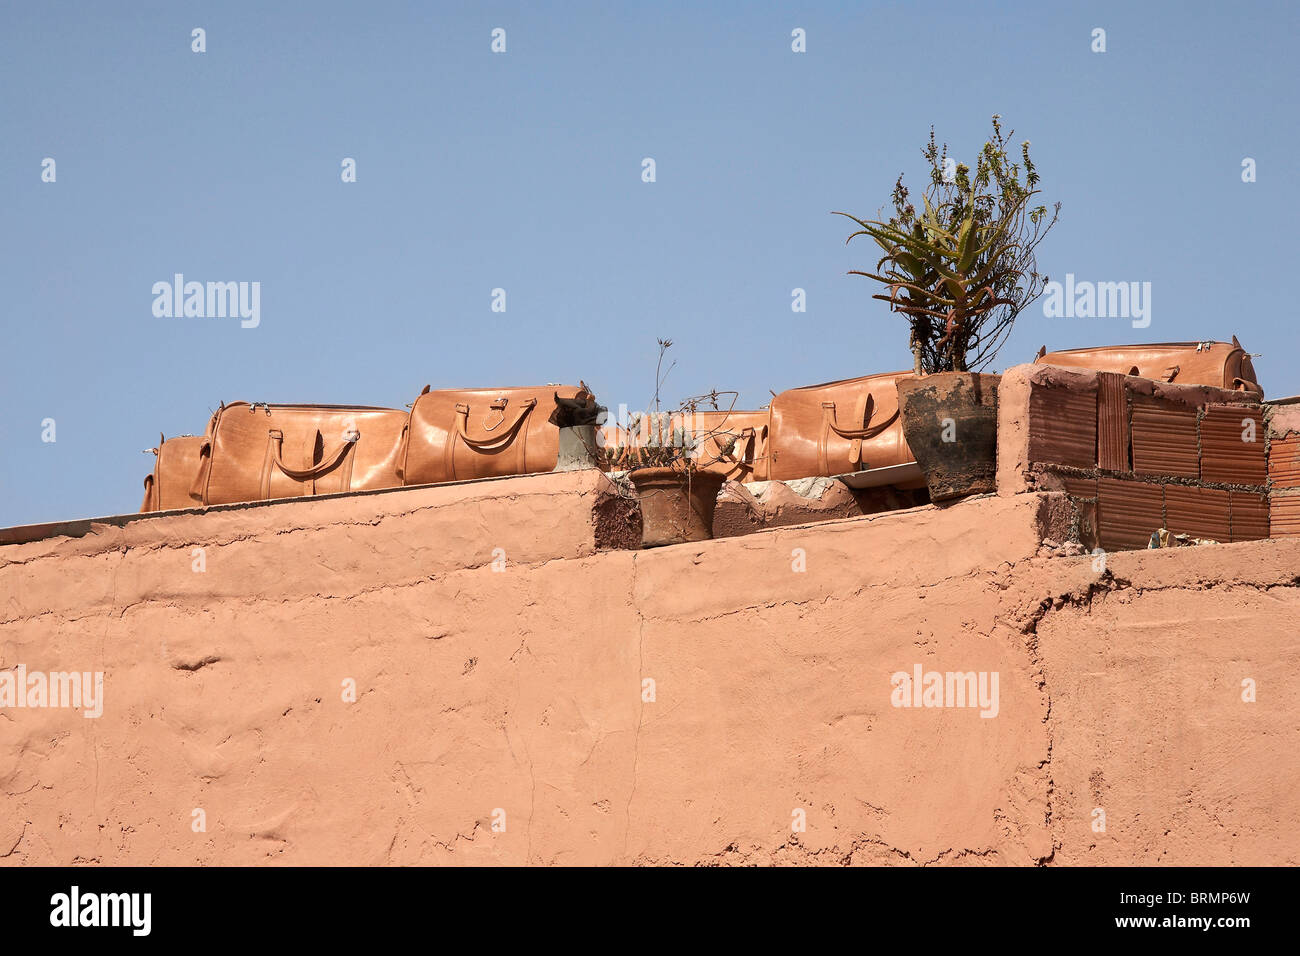 MARRAKESH: LEATHER BAGS ON DISPLAY ON ROOFTOP Stock Photo